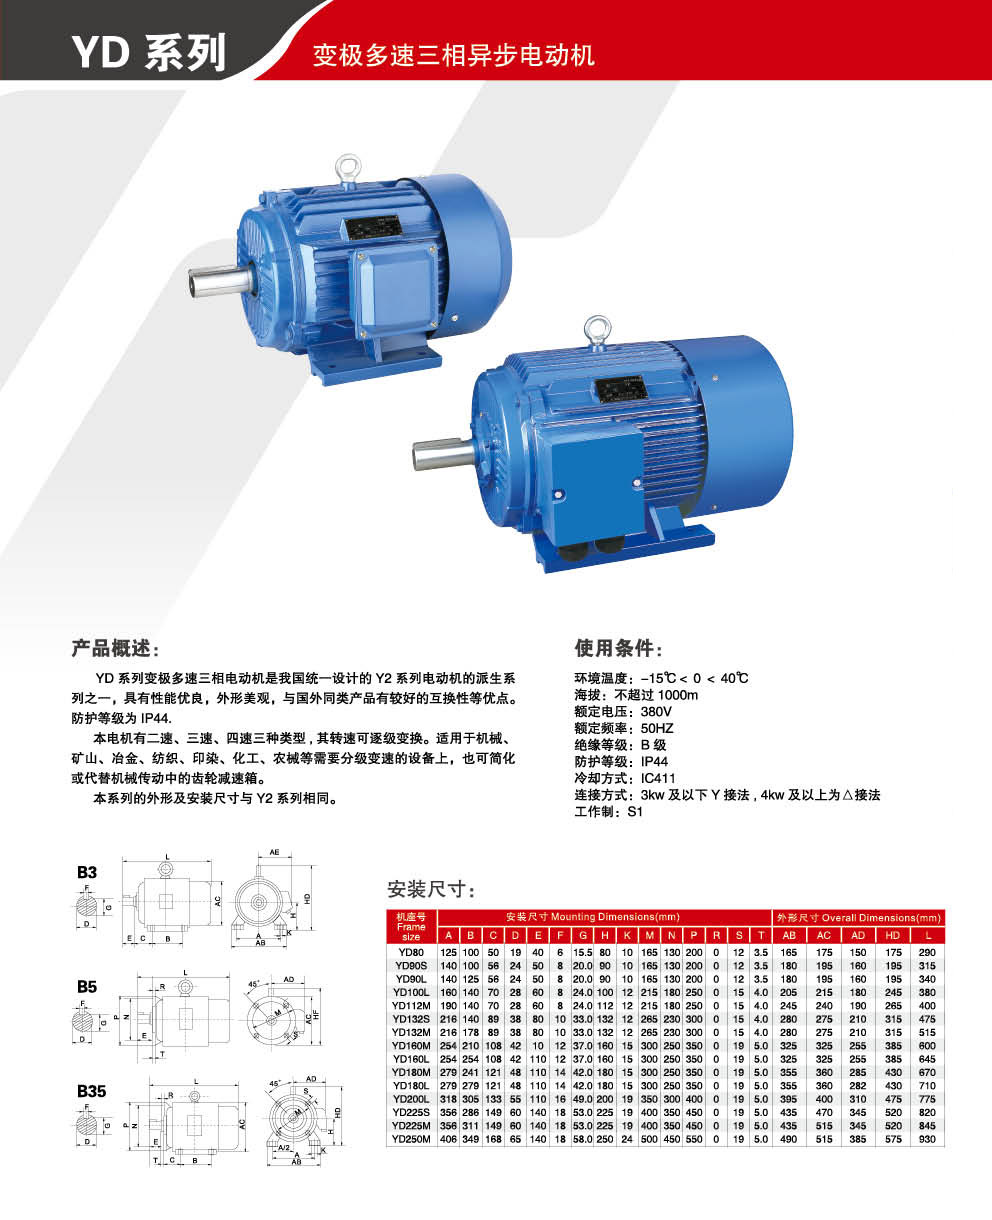 YD series pole-changing multi-speed three-phase asynchronous motor 